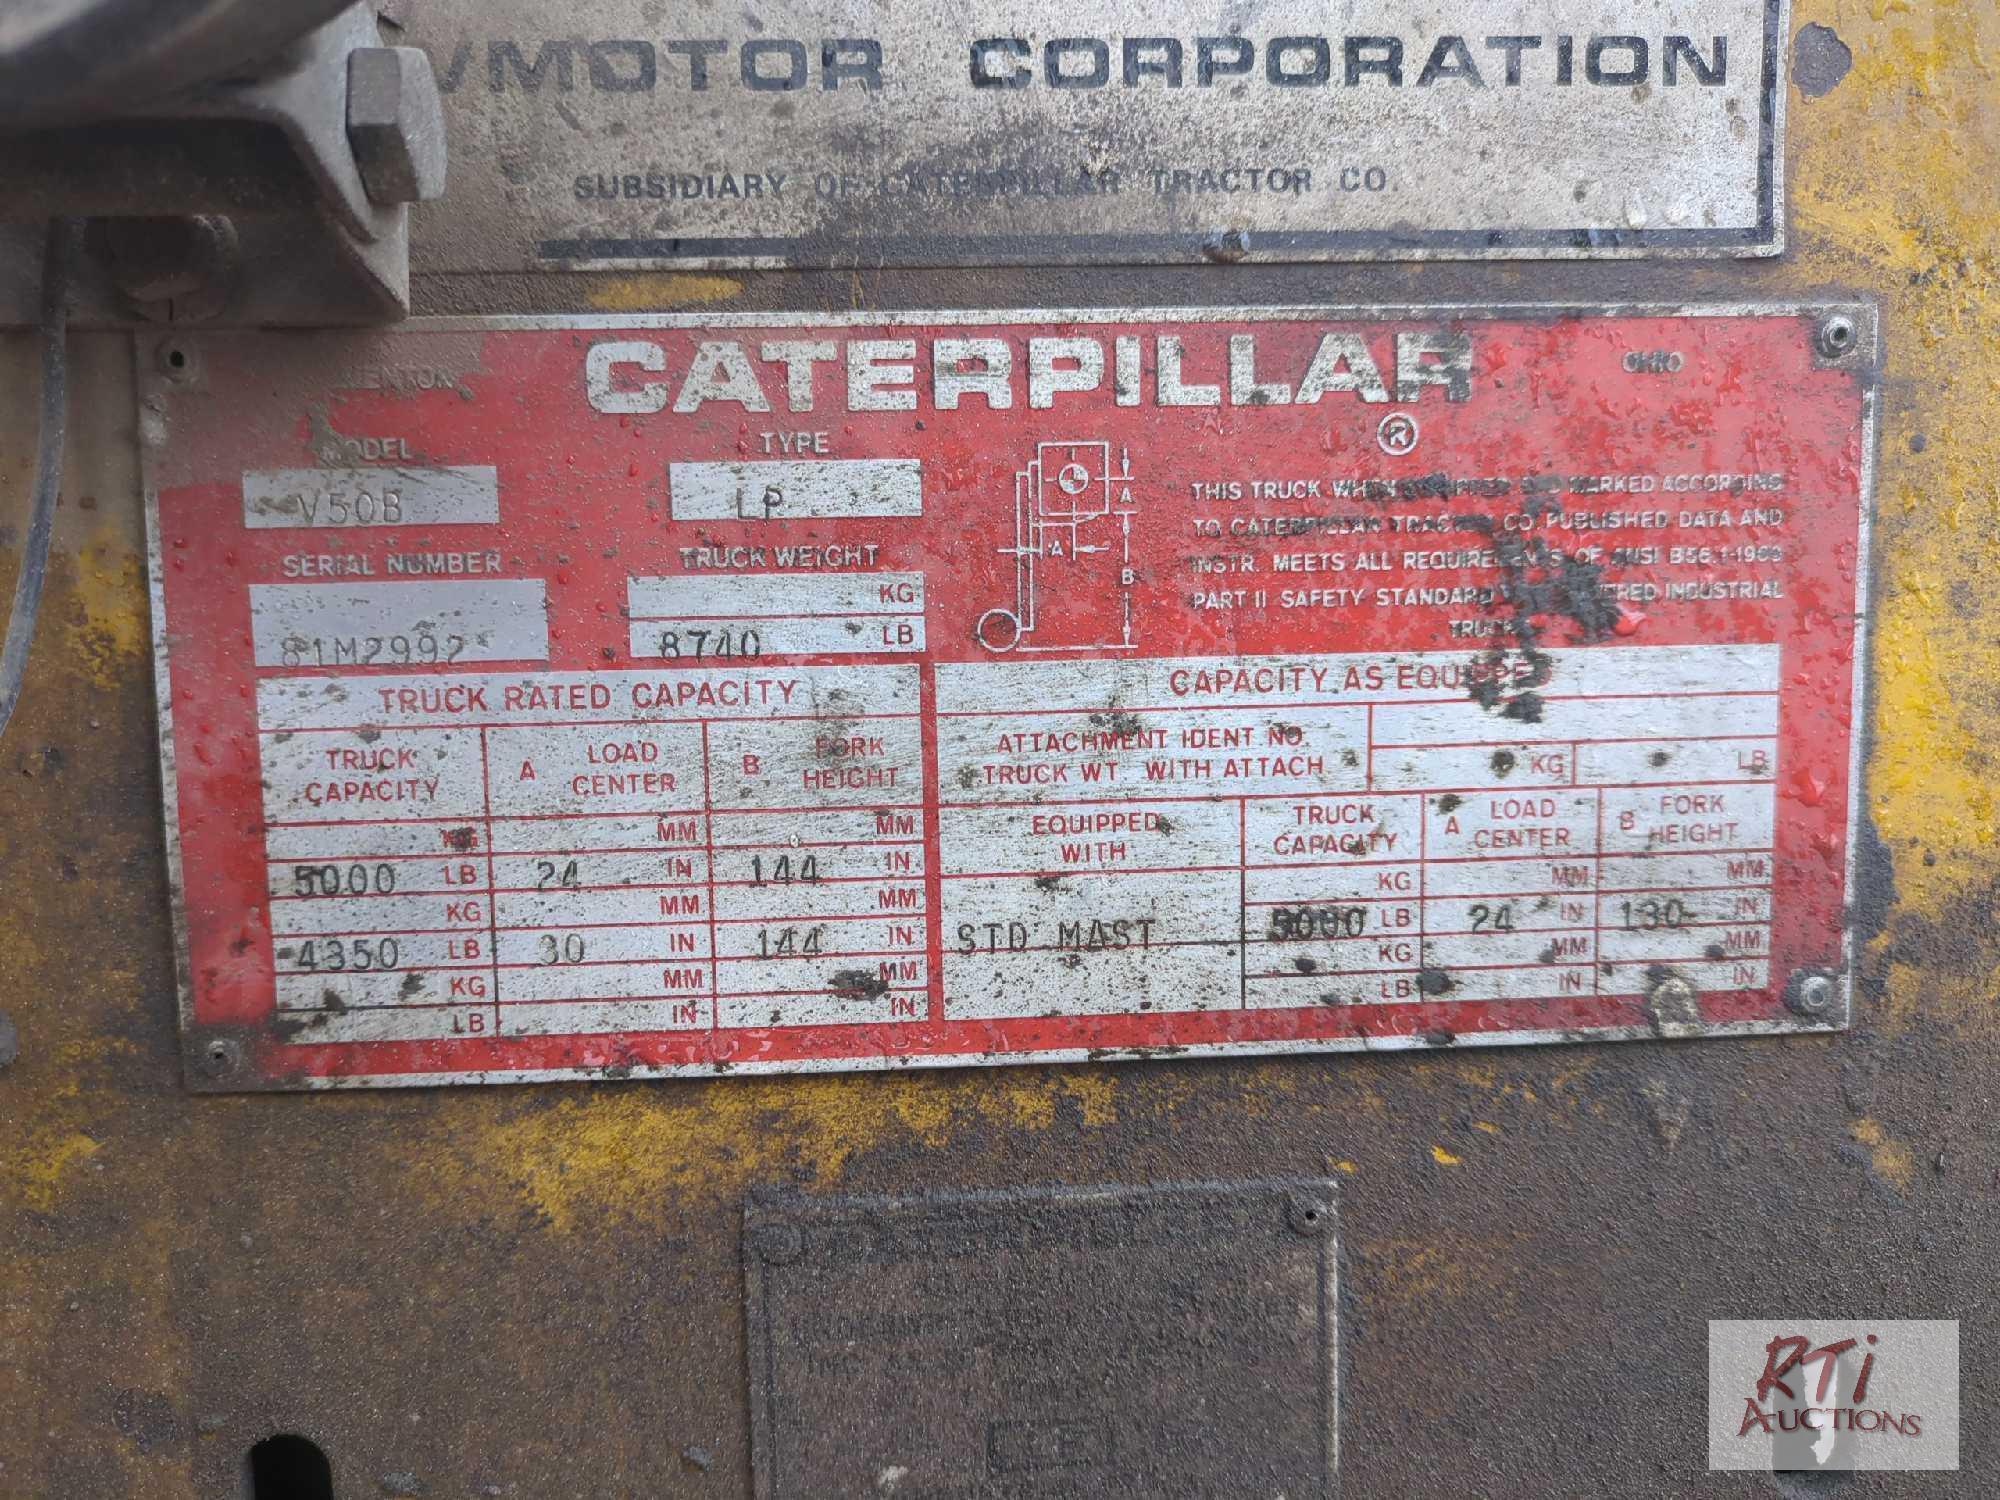 Caterpillar tow motor V50B forklift, 5,000 lbs. capacity, 2 stage, 14ft reach